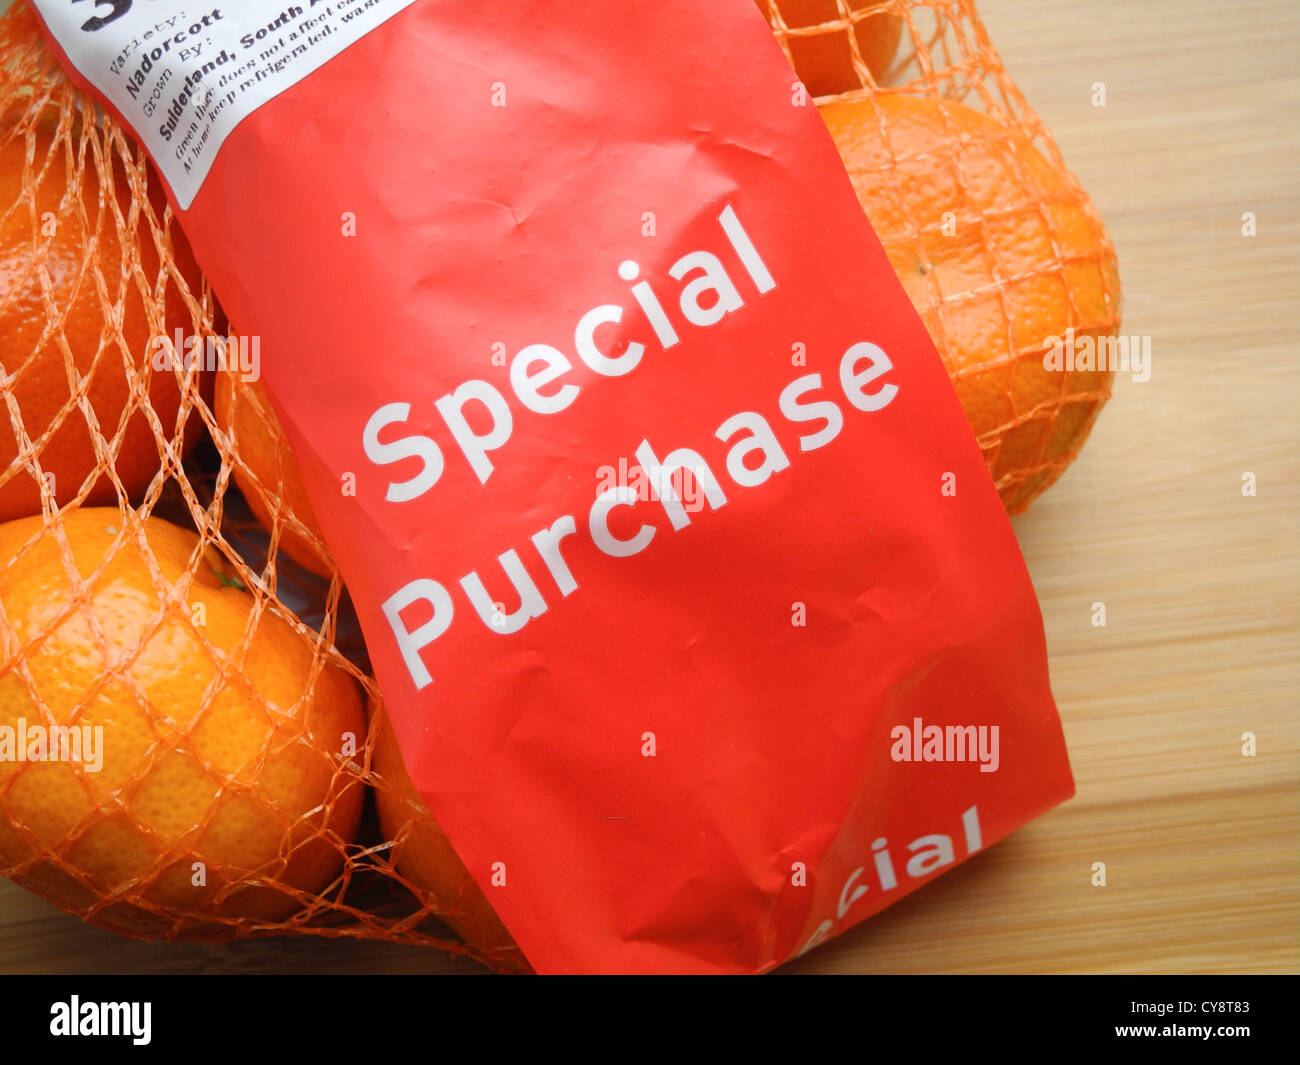 Special purchase supermarket bargain Stock Photo